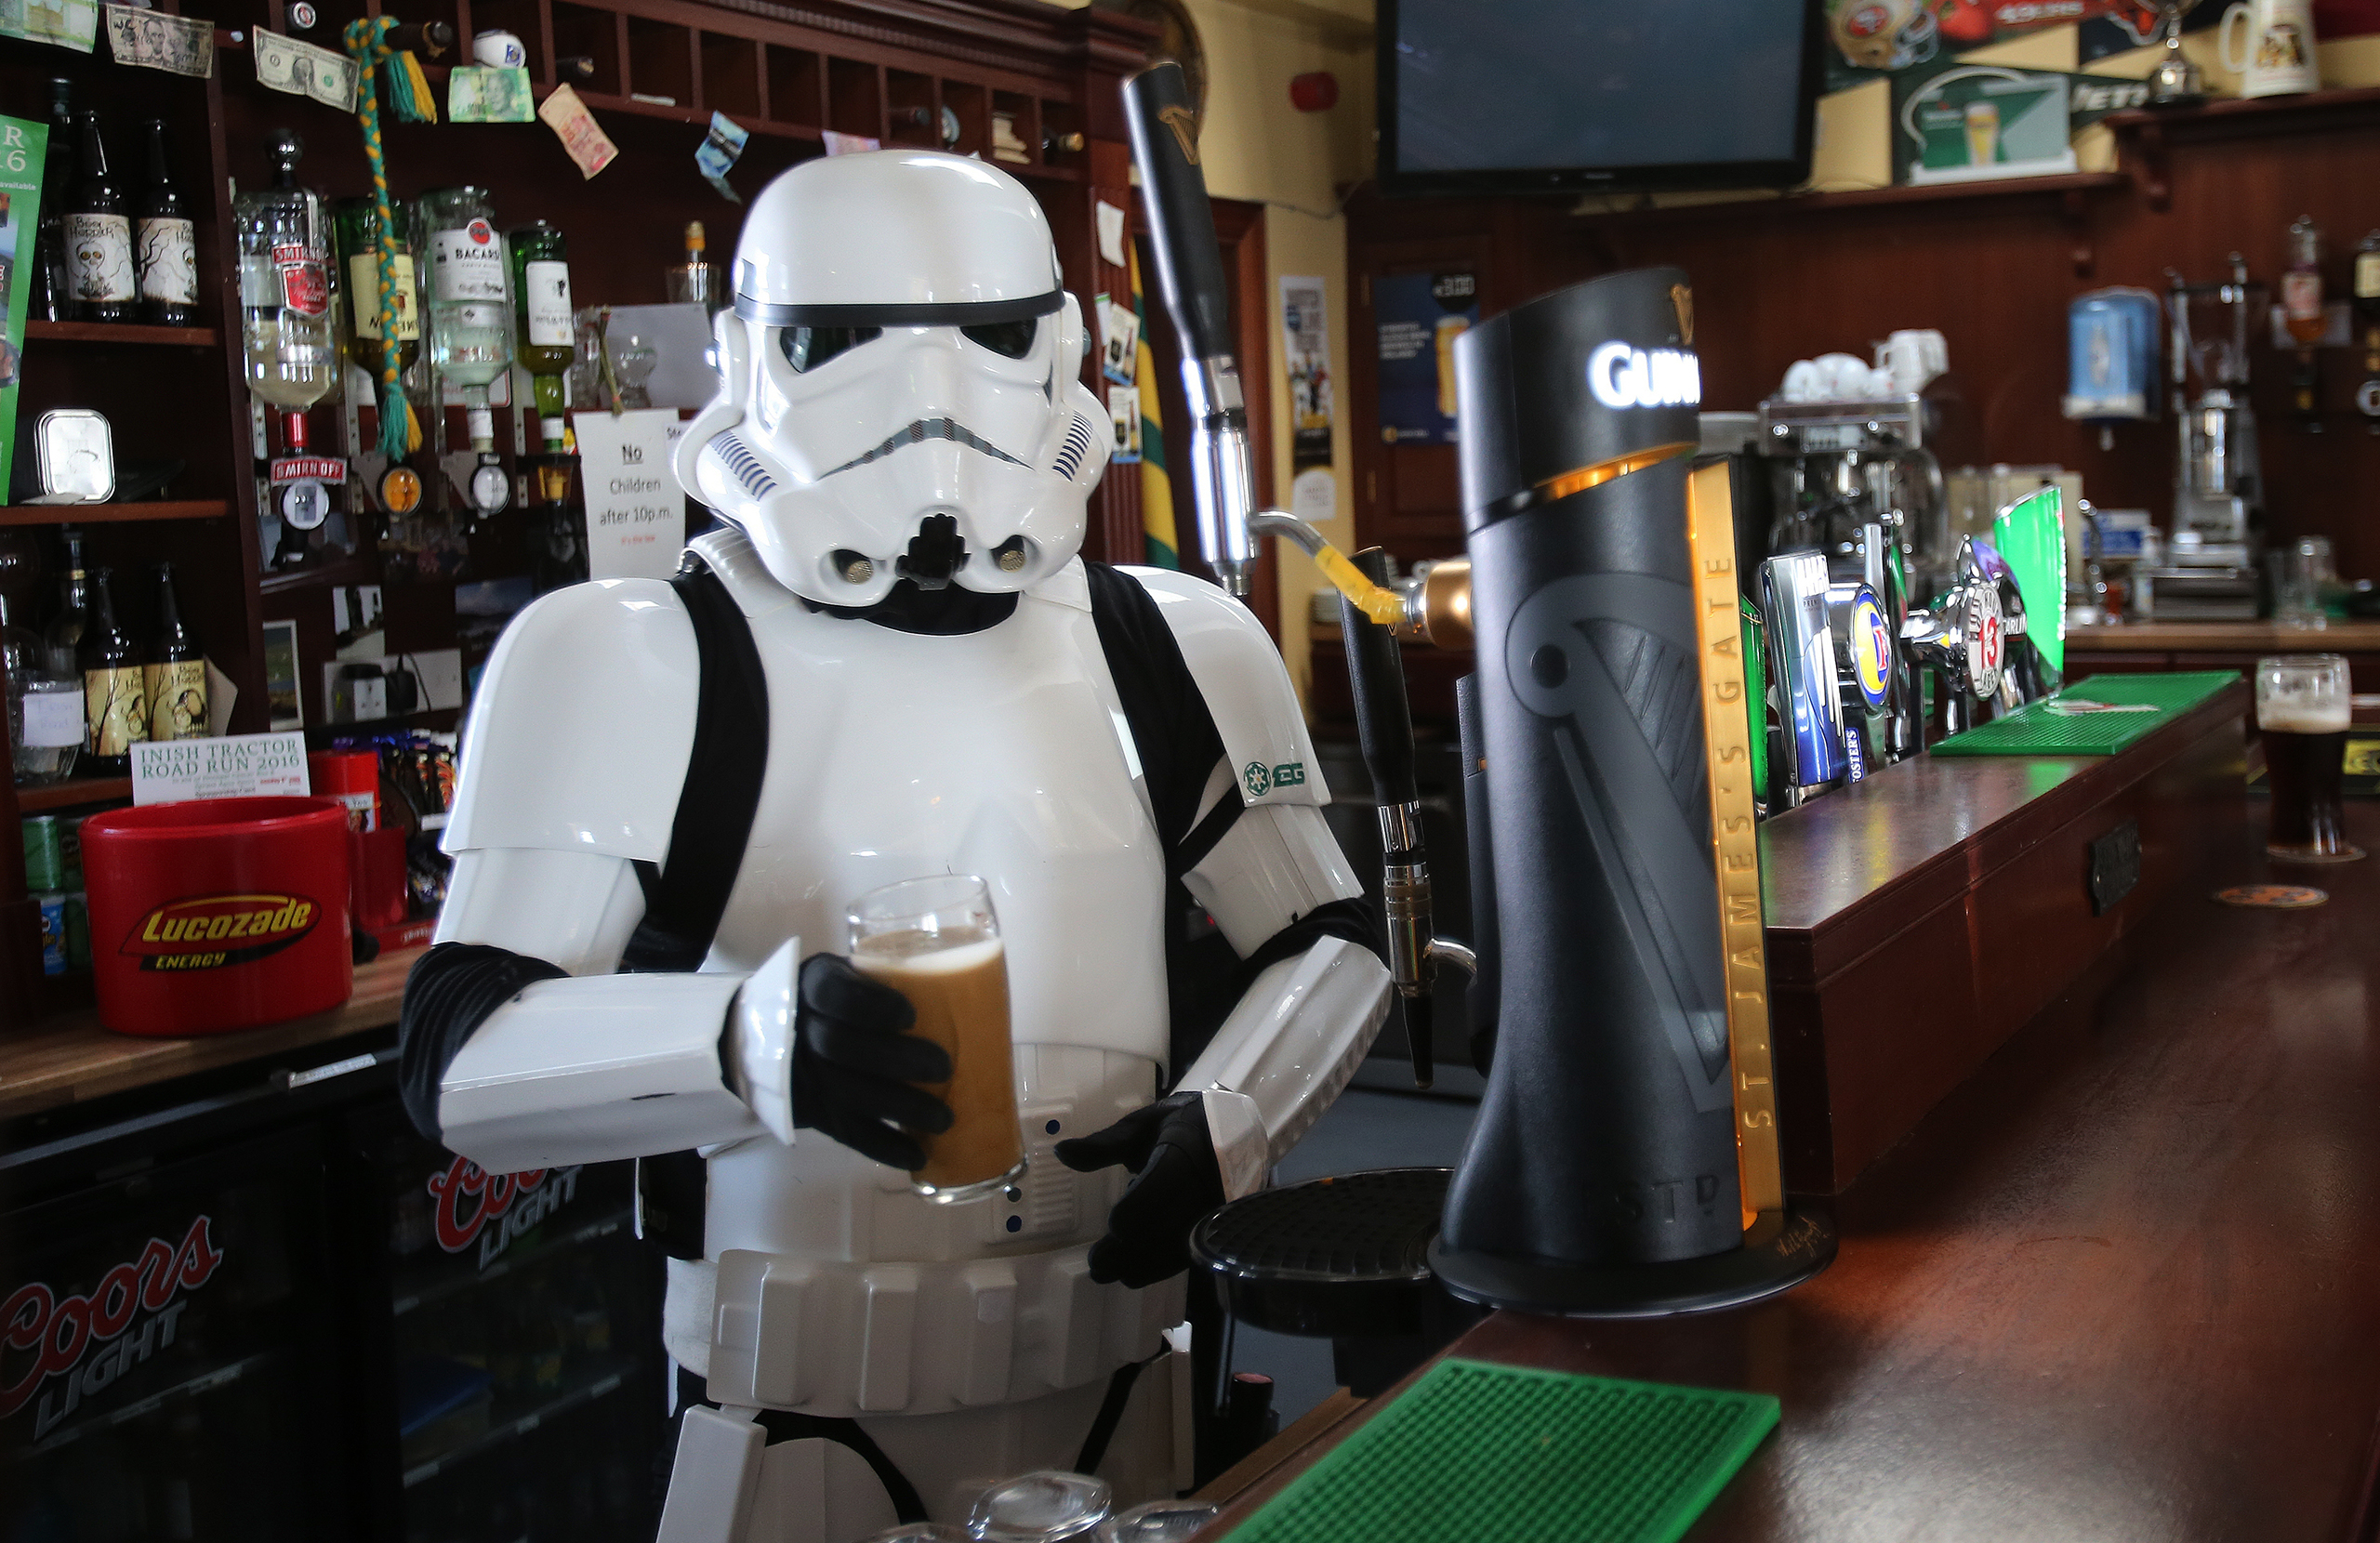 JJ McGettigan from the Emerald Garrison, a star Wars costuming club, in Farrens Bar in Malin Head, Co Donegal Ireland, as filming for the next Star Wars movie will take place there, May 12, 2016. (Niall Carson—PA Wire/Press Association Images/AP)